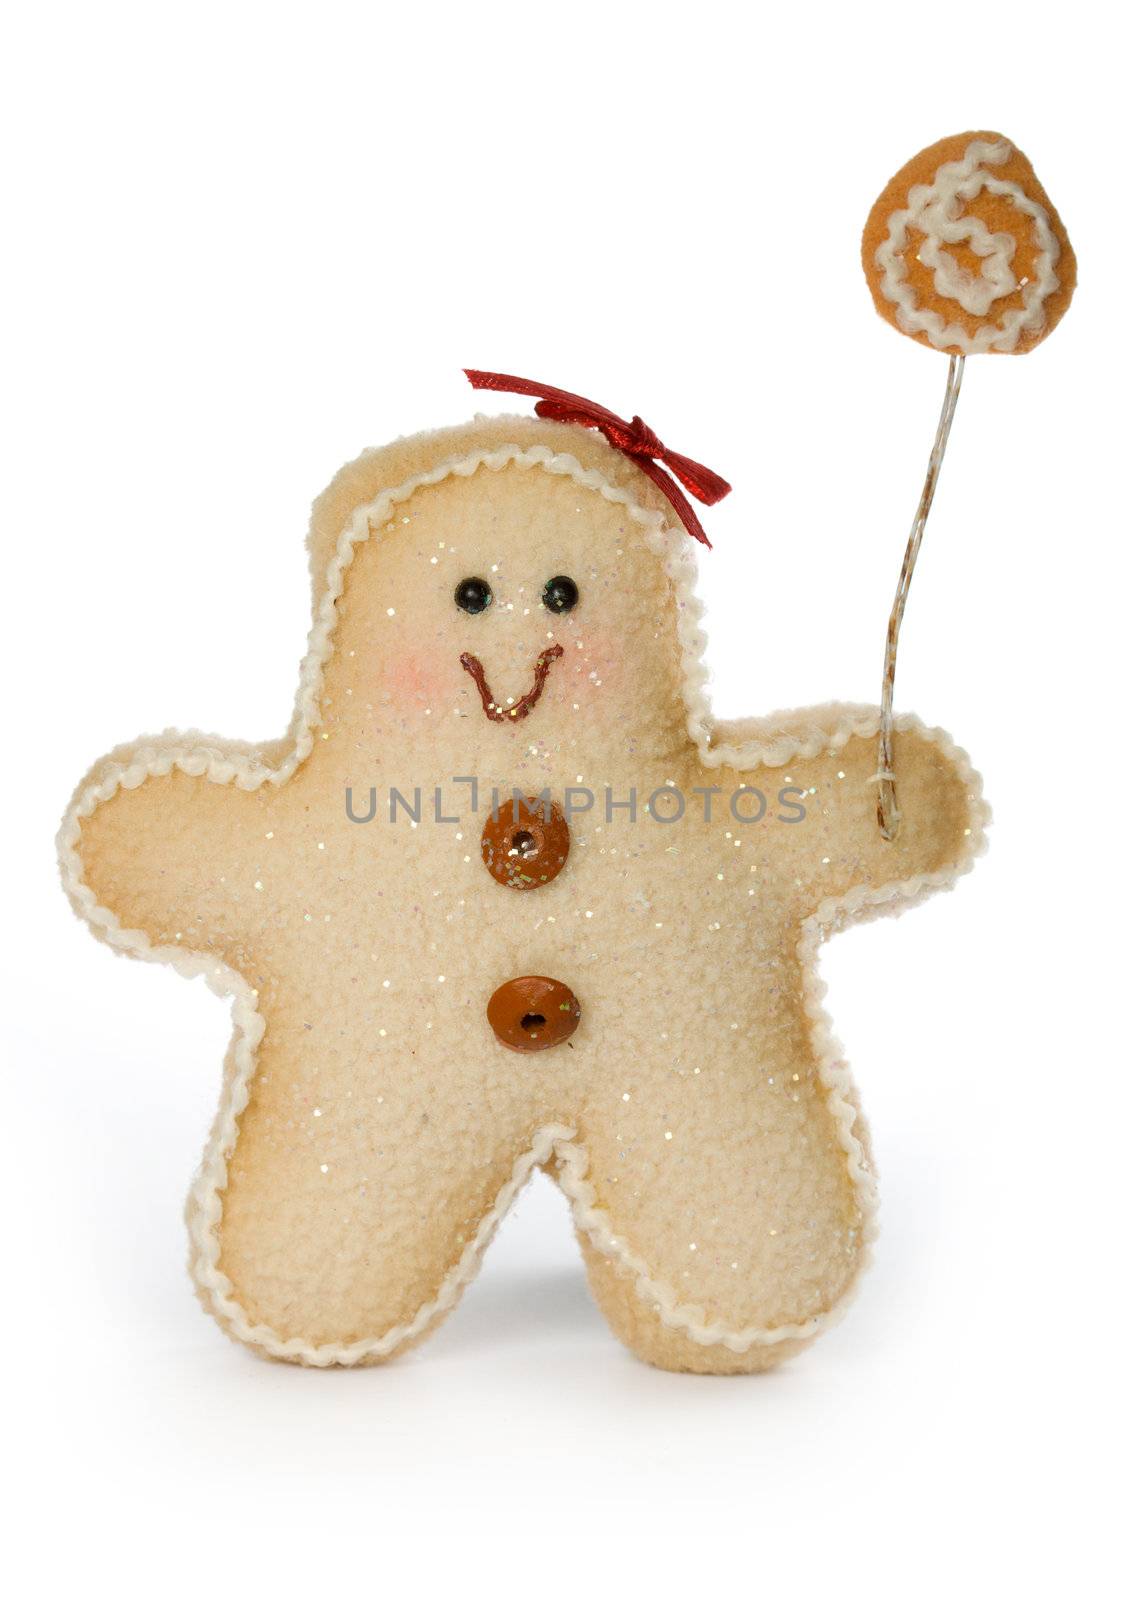 Smiling gingerbread man toy decorated with buttons and bow